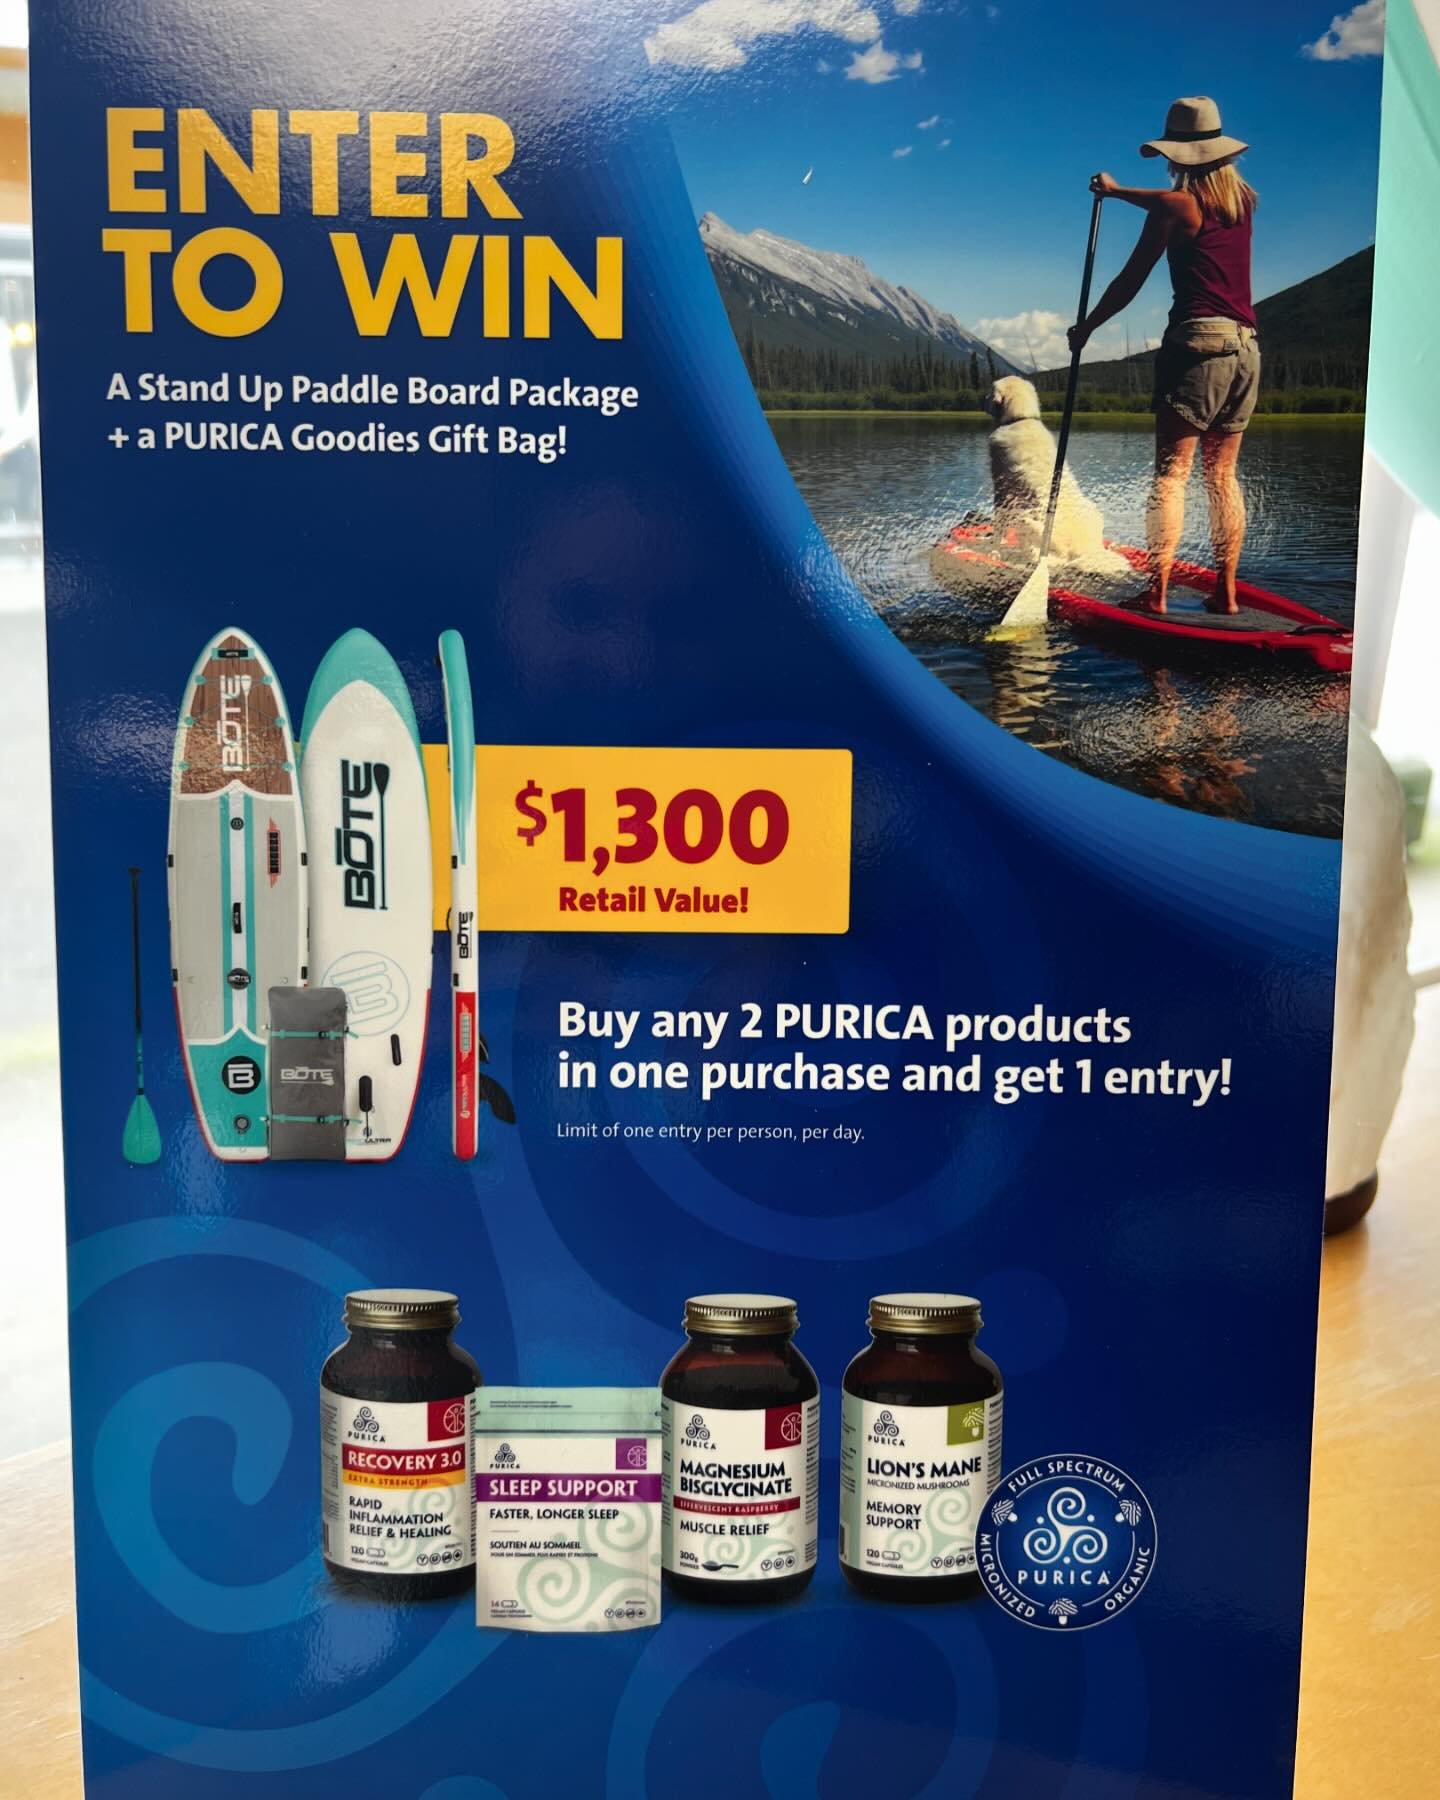 Enter to win a Paddle Board this month IN-STORE!! Purchase any 2 @puricawellness products in one purchase and get 1 entry! Our biggest giveaway yet!!